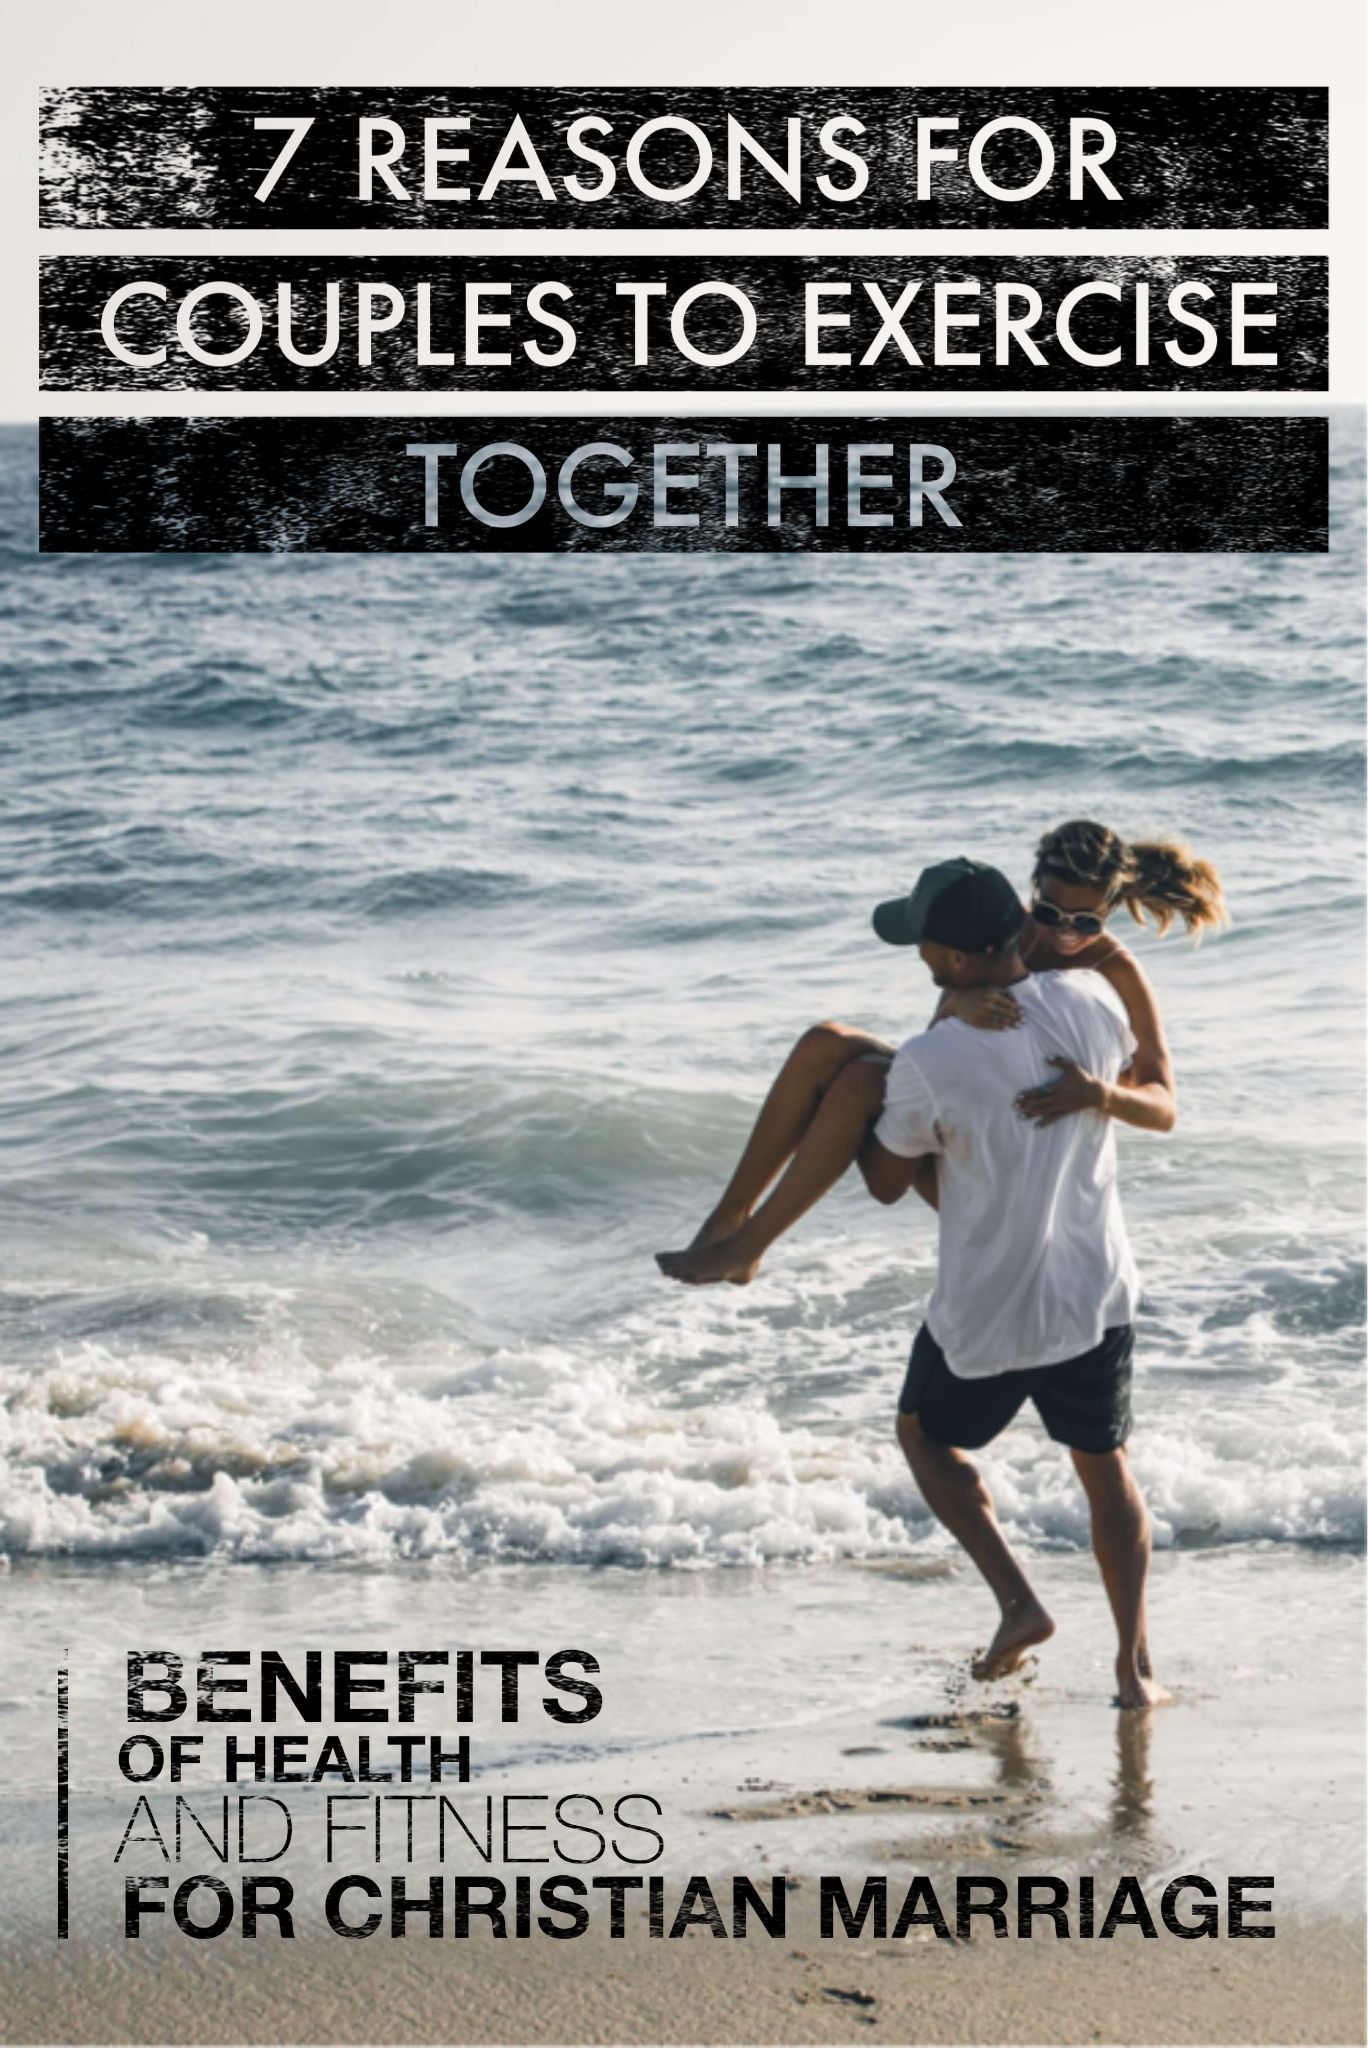 12 fitness Couples benefits of ideas